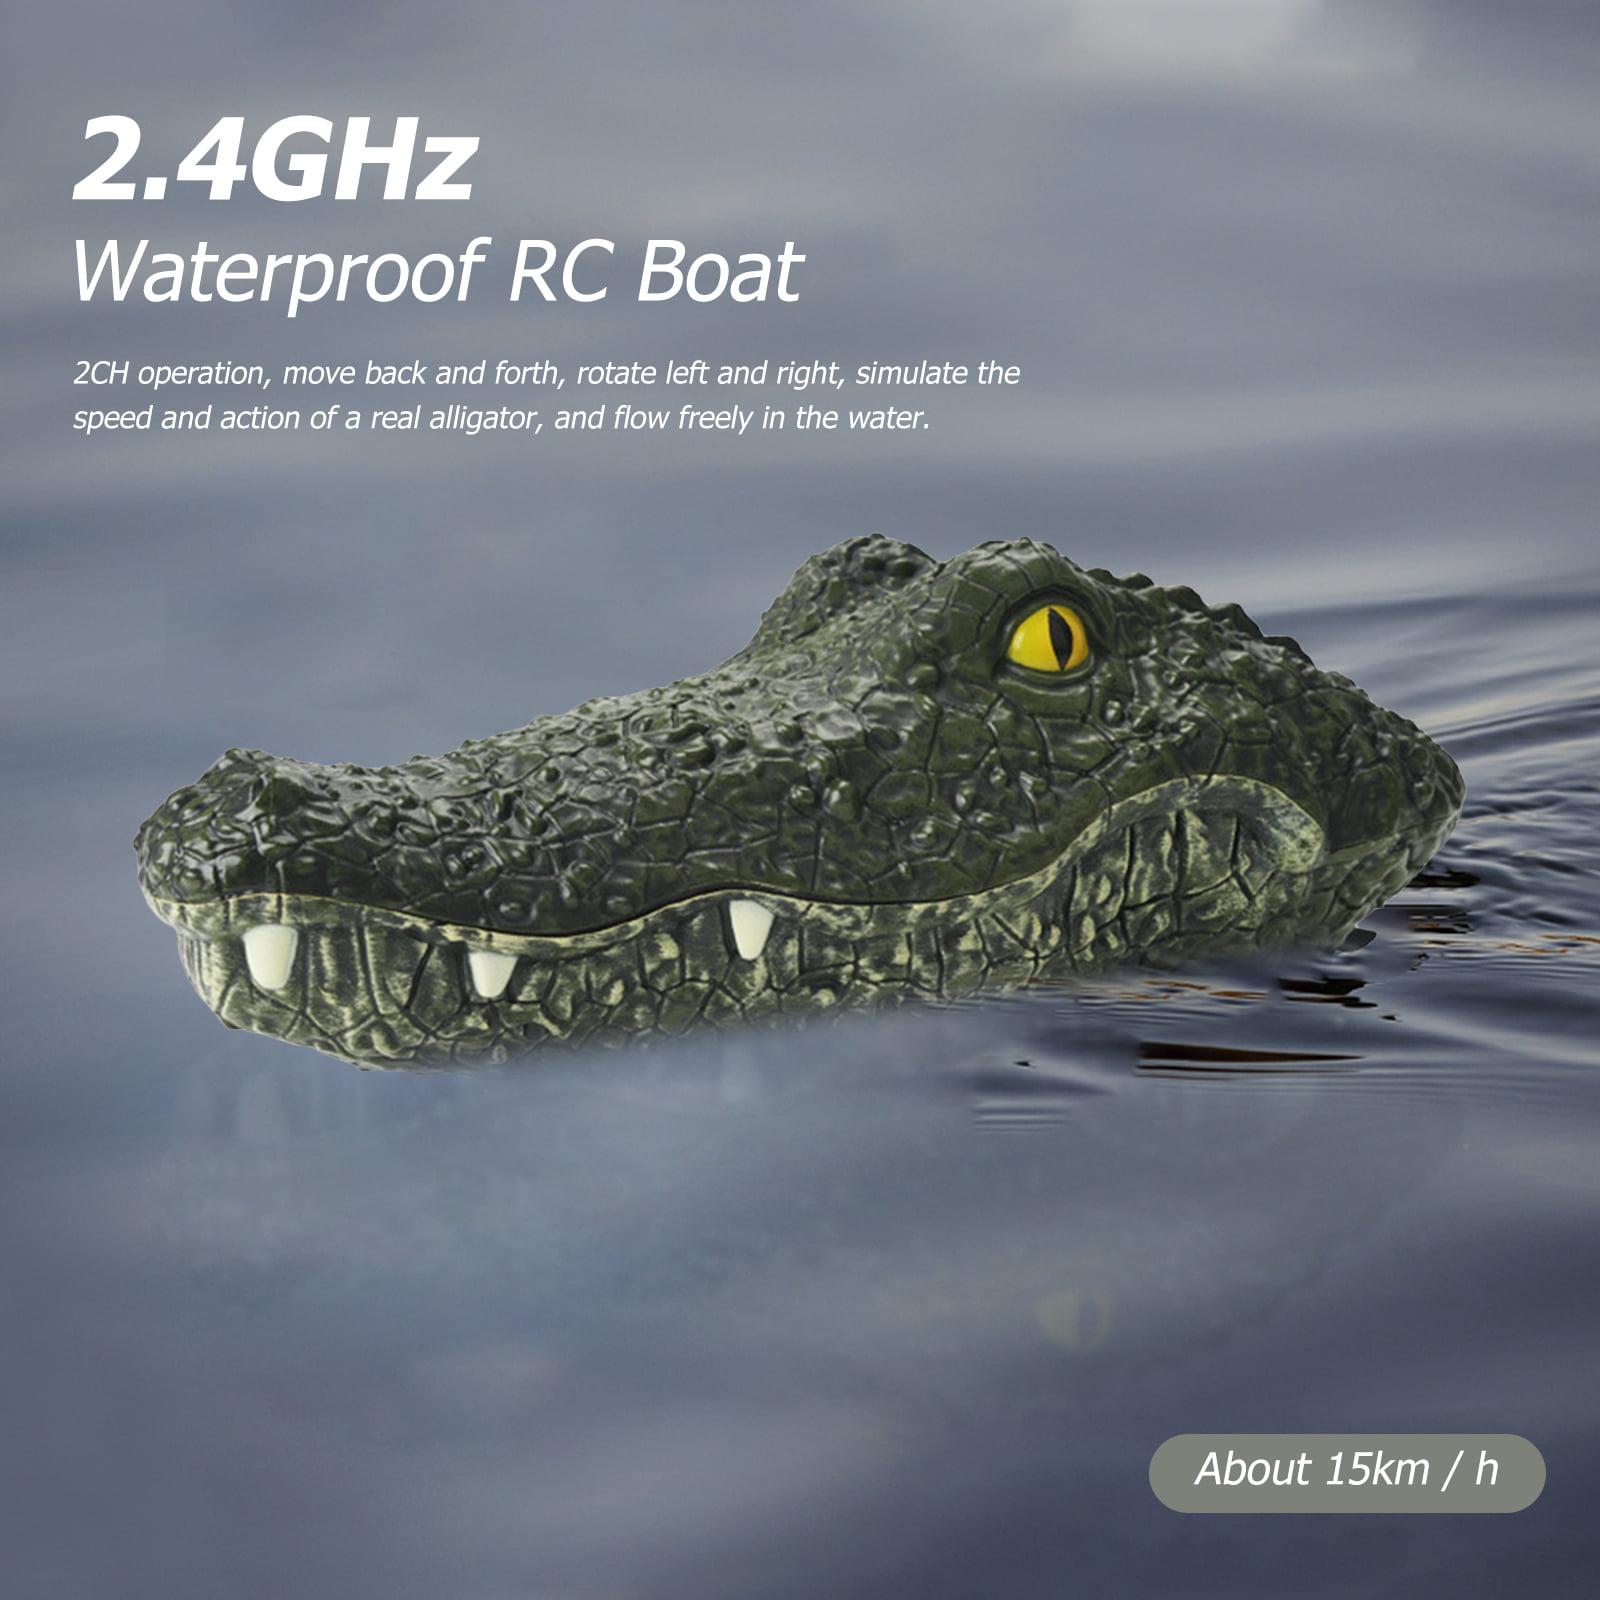 Rc Gator Boat: Easy control and environmentally friendly.